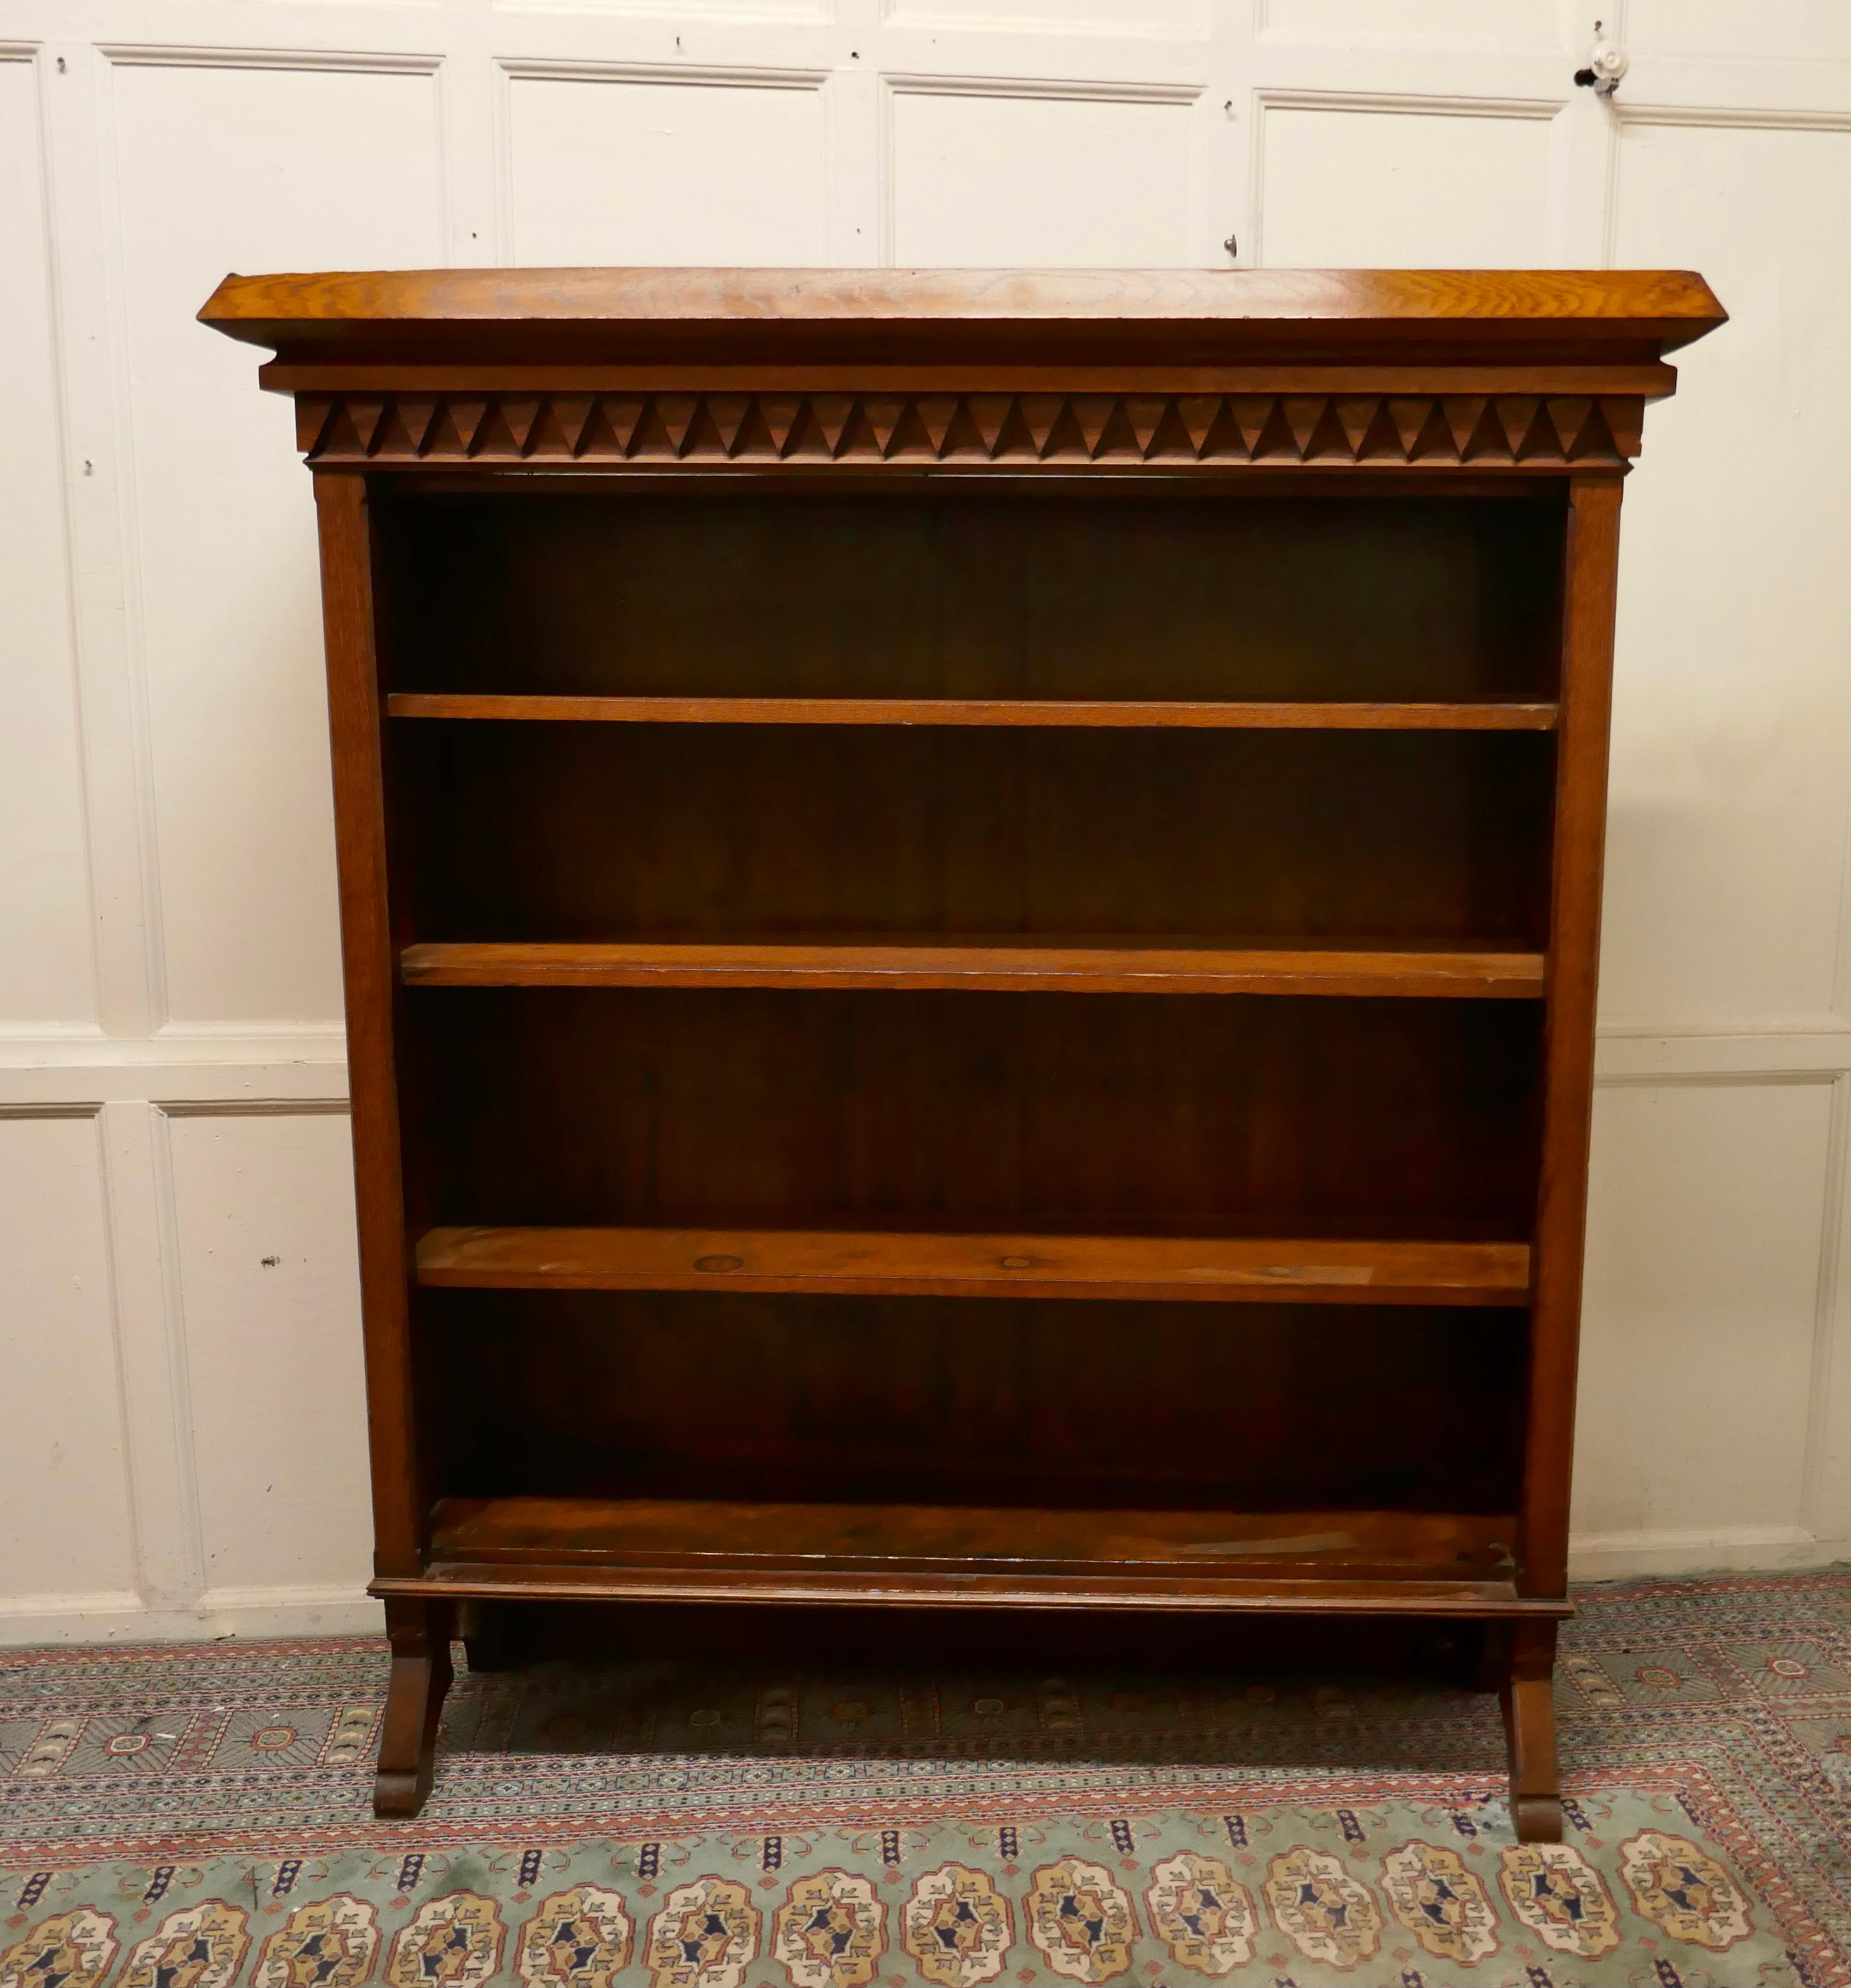 Arts & Crafts large golden oak open bookcase

This is an excellently designed piece, it is very much in the Arts & Crafts style, with a decorative cornice
The book case is made in oak, it holds 3 adjustable shelves these are veneered in oak along